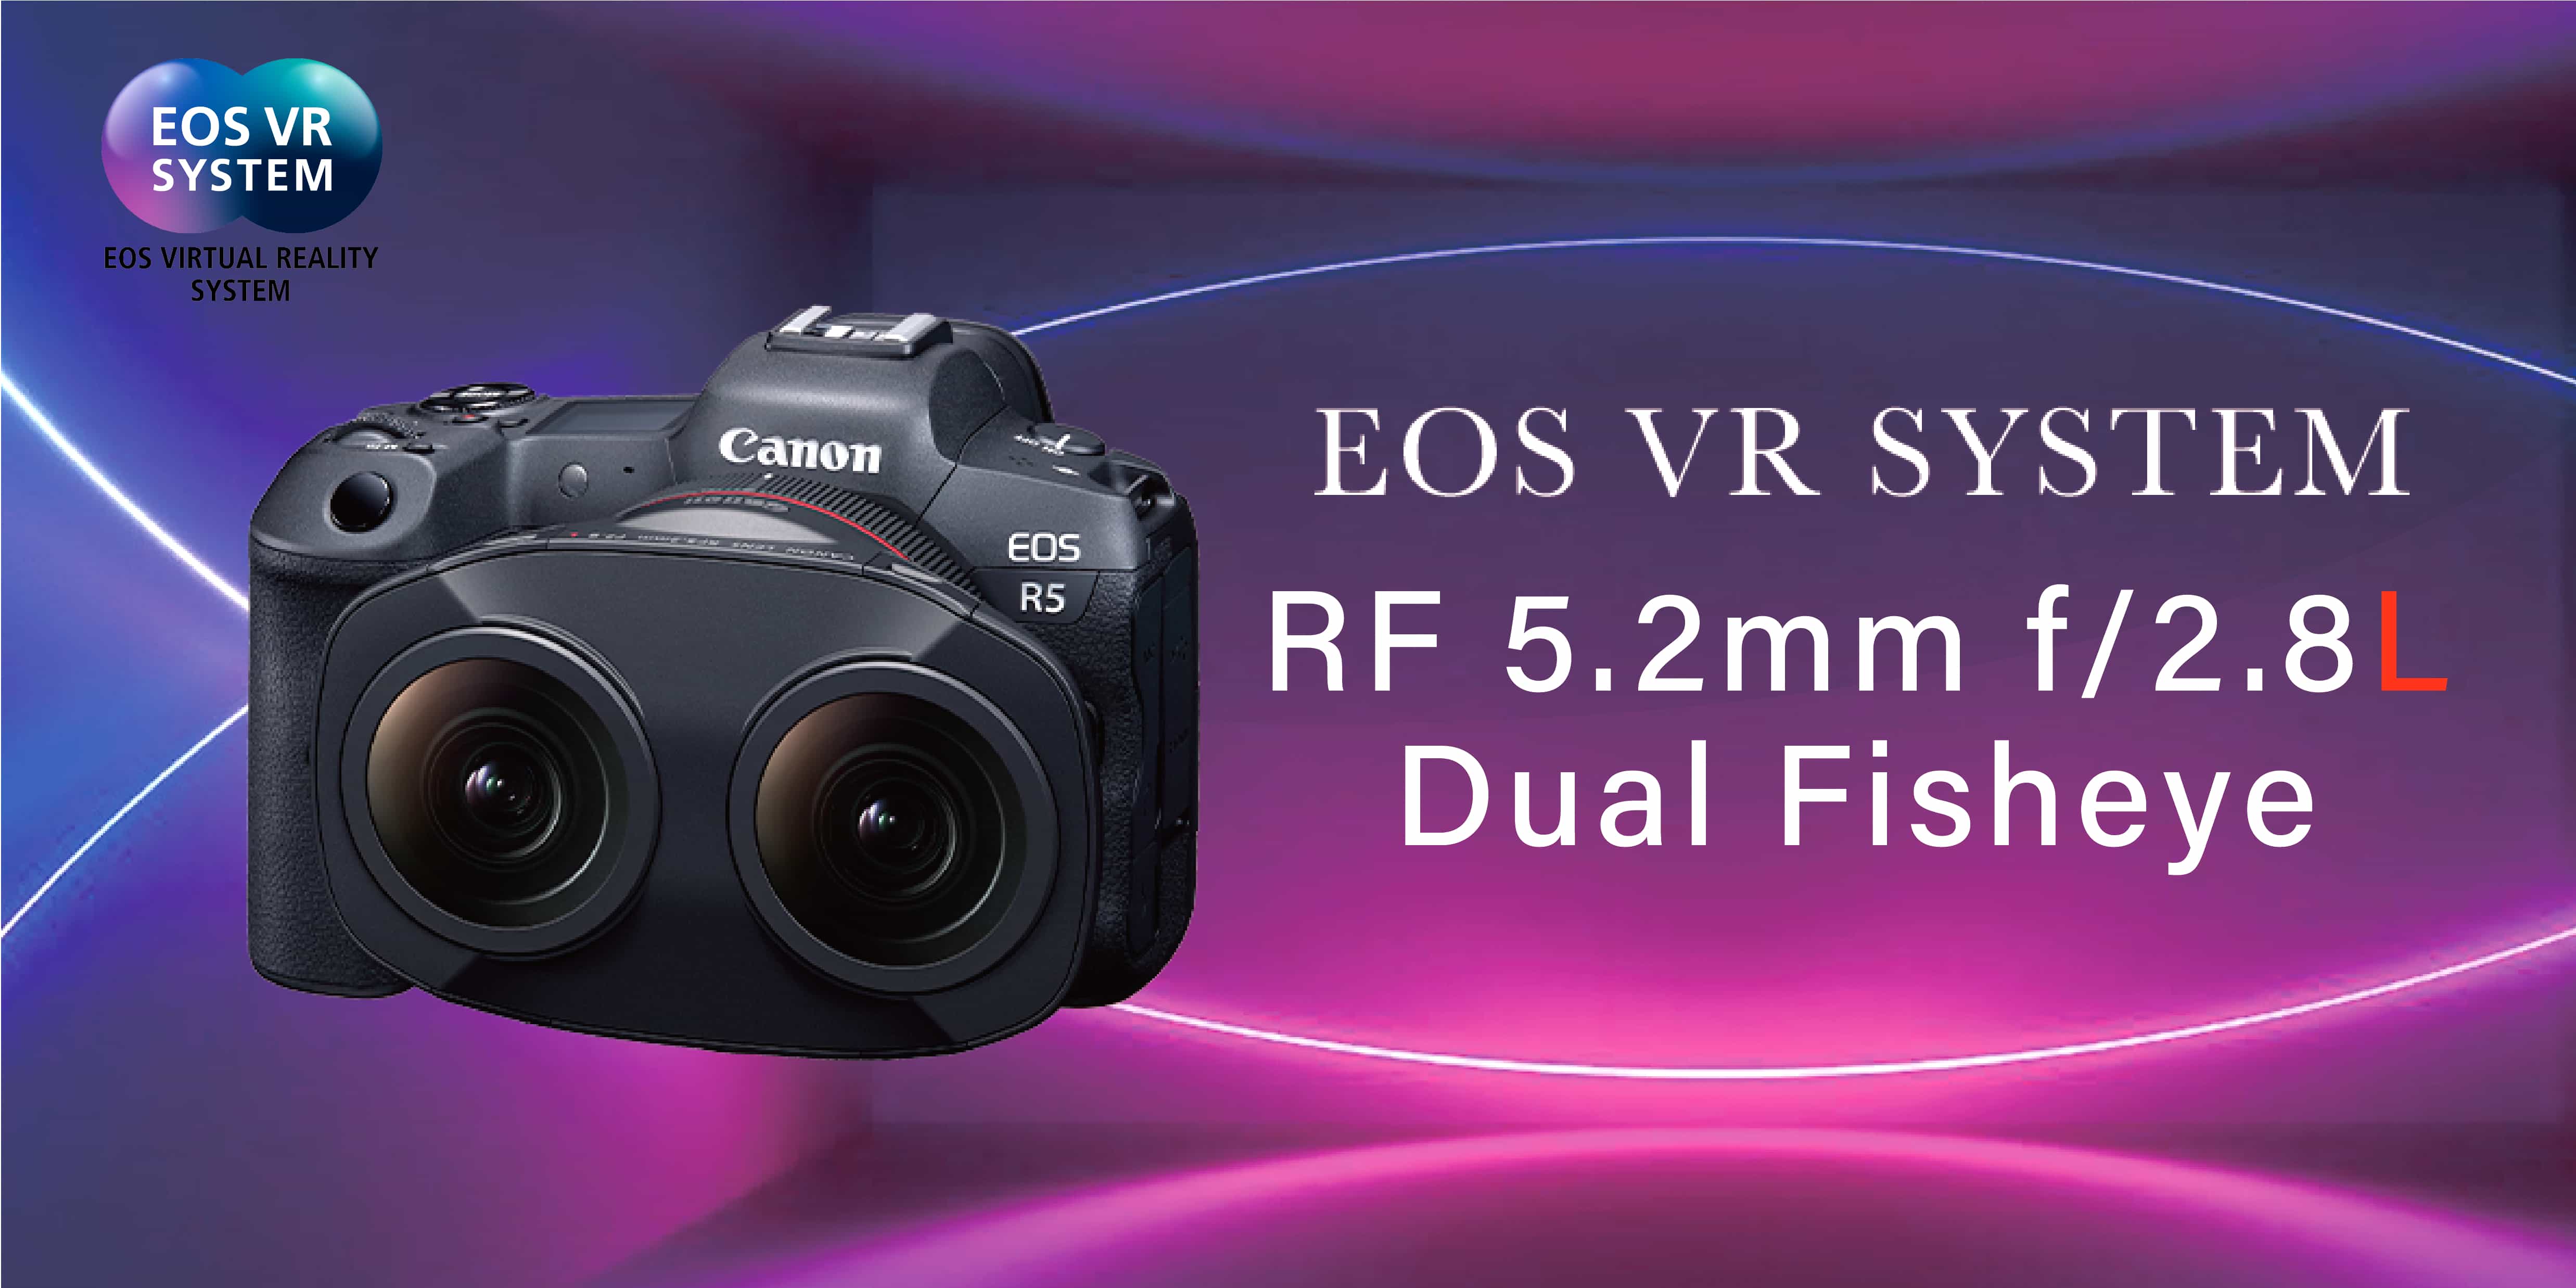 Canon Officially Launches the RF 5.2mm f/2.8L Dual Fisheye with the New EOS VR System